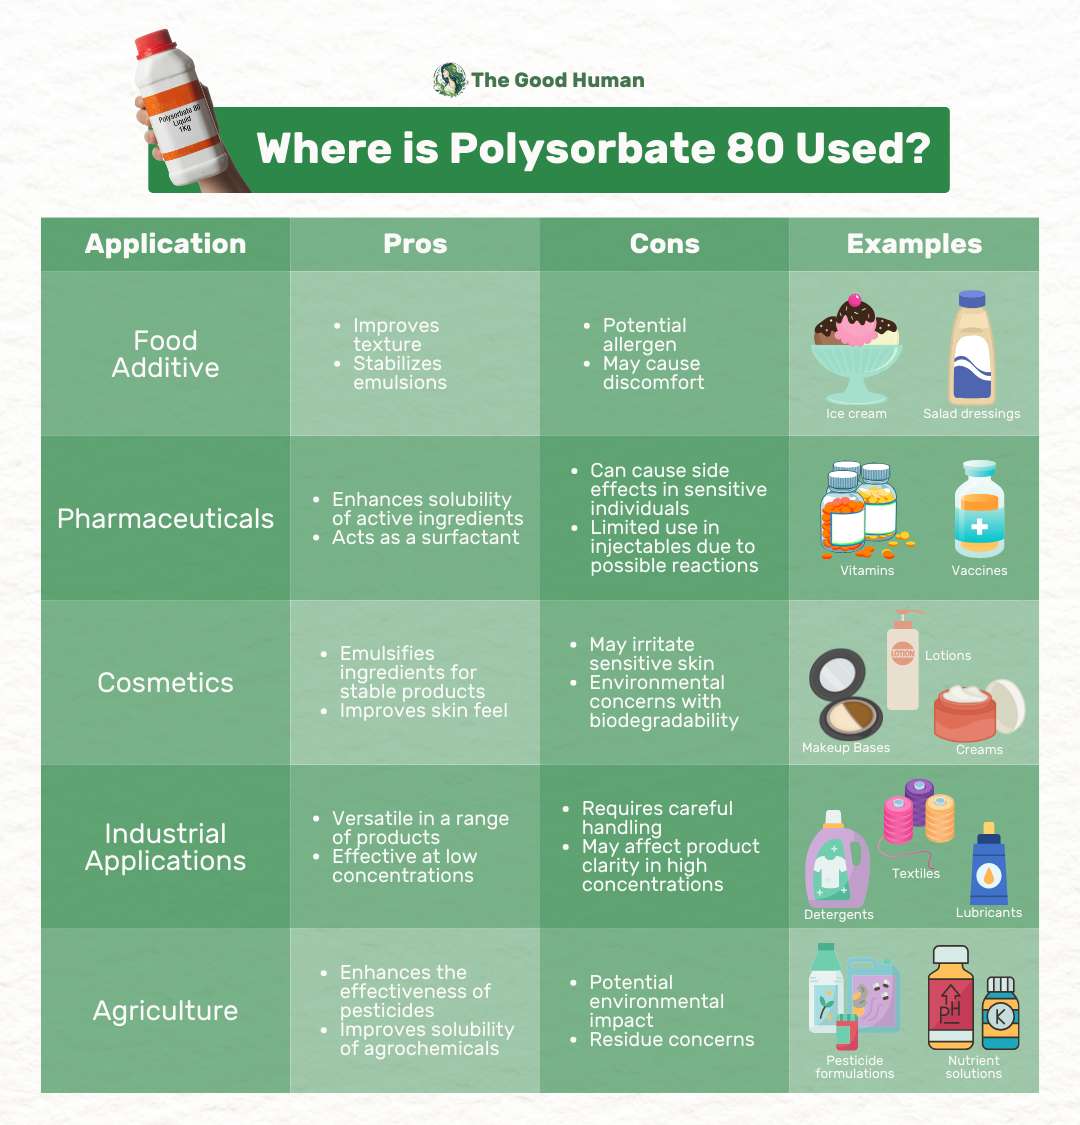 Where Polysorbate 80 is used.